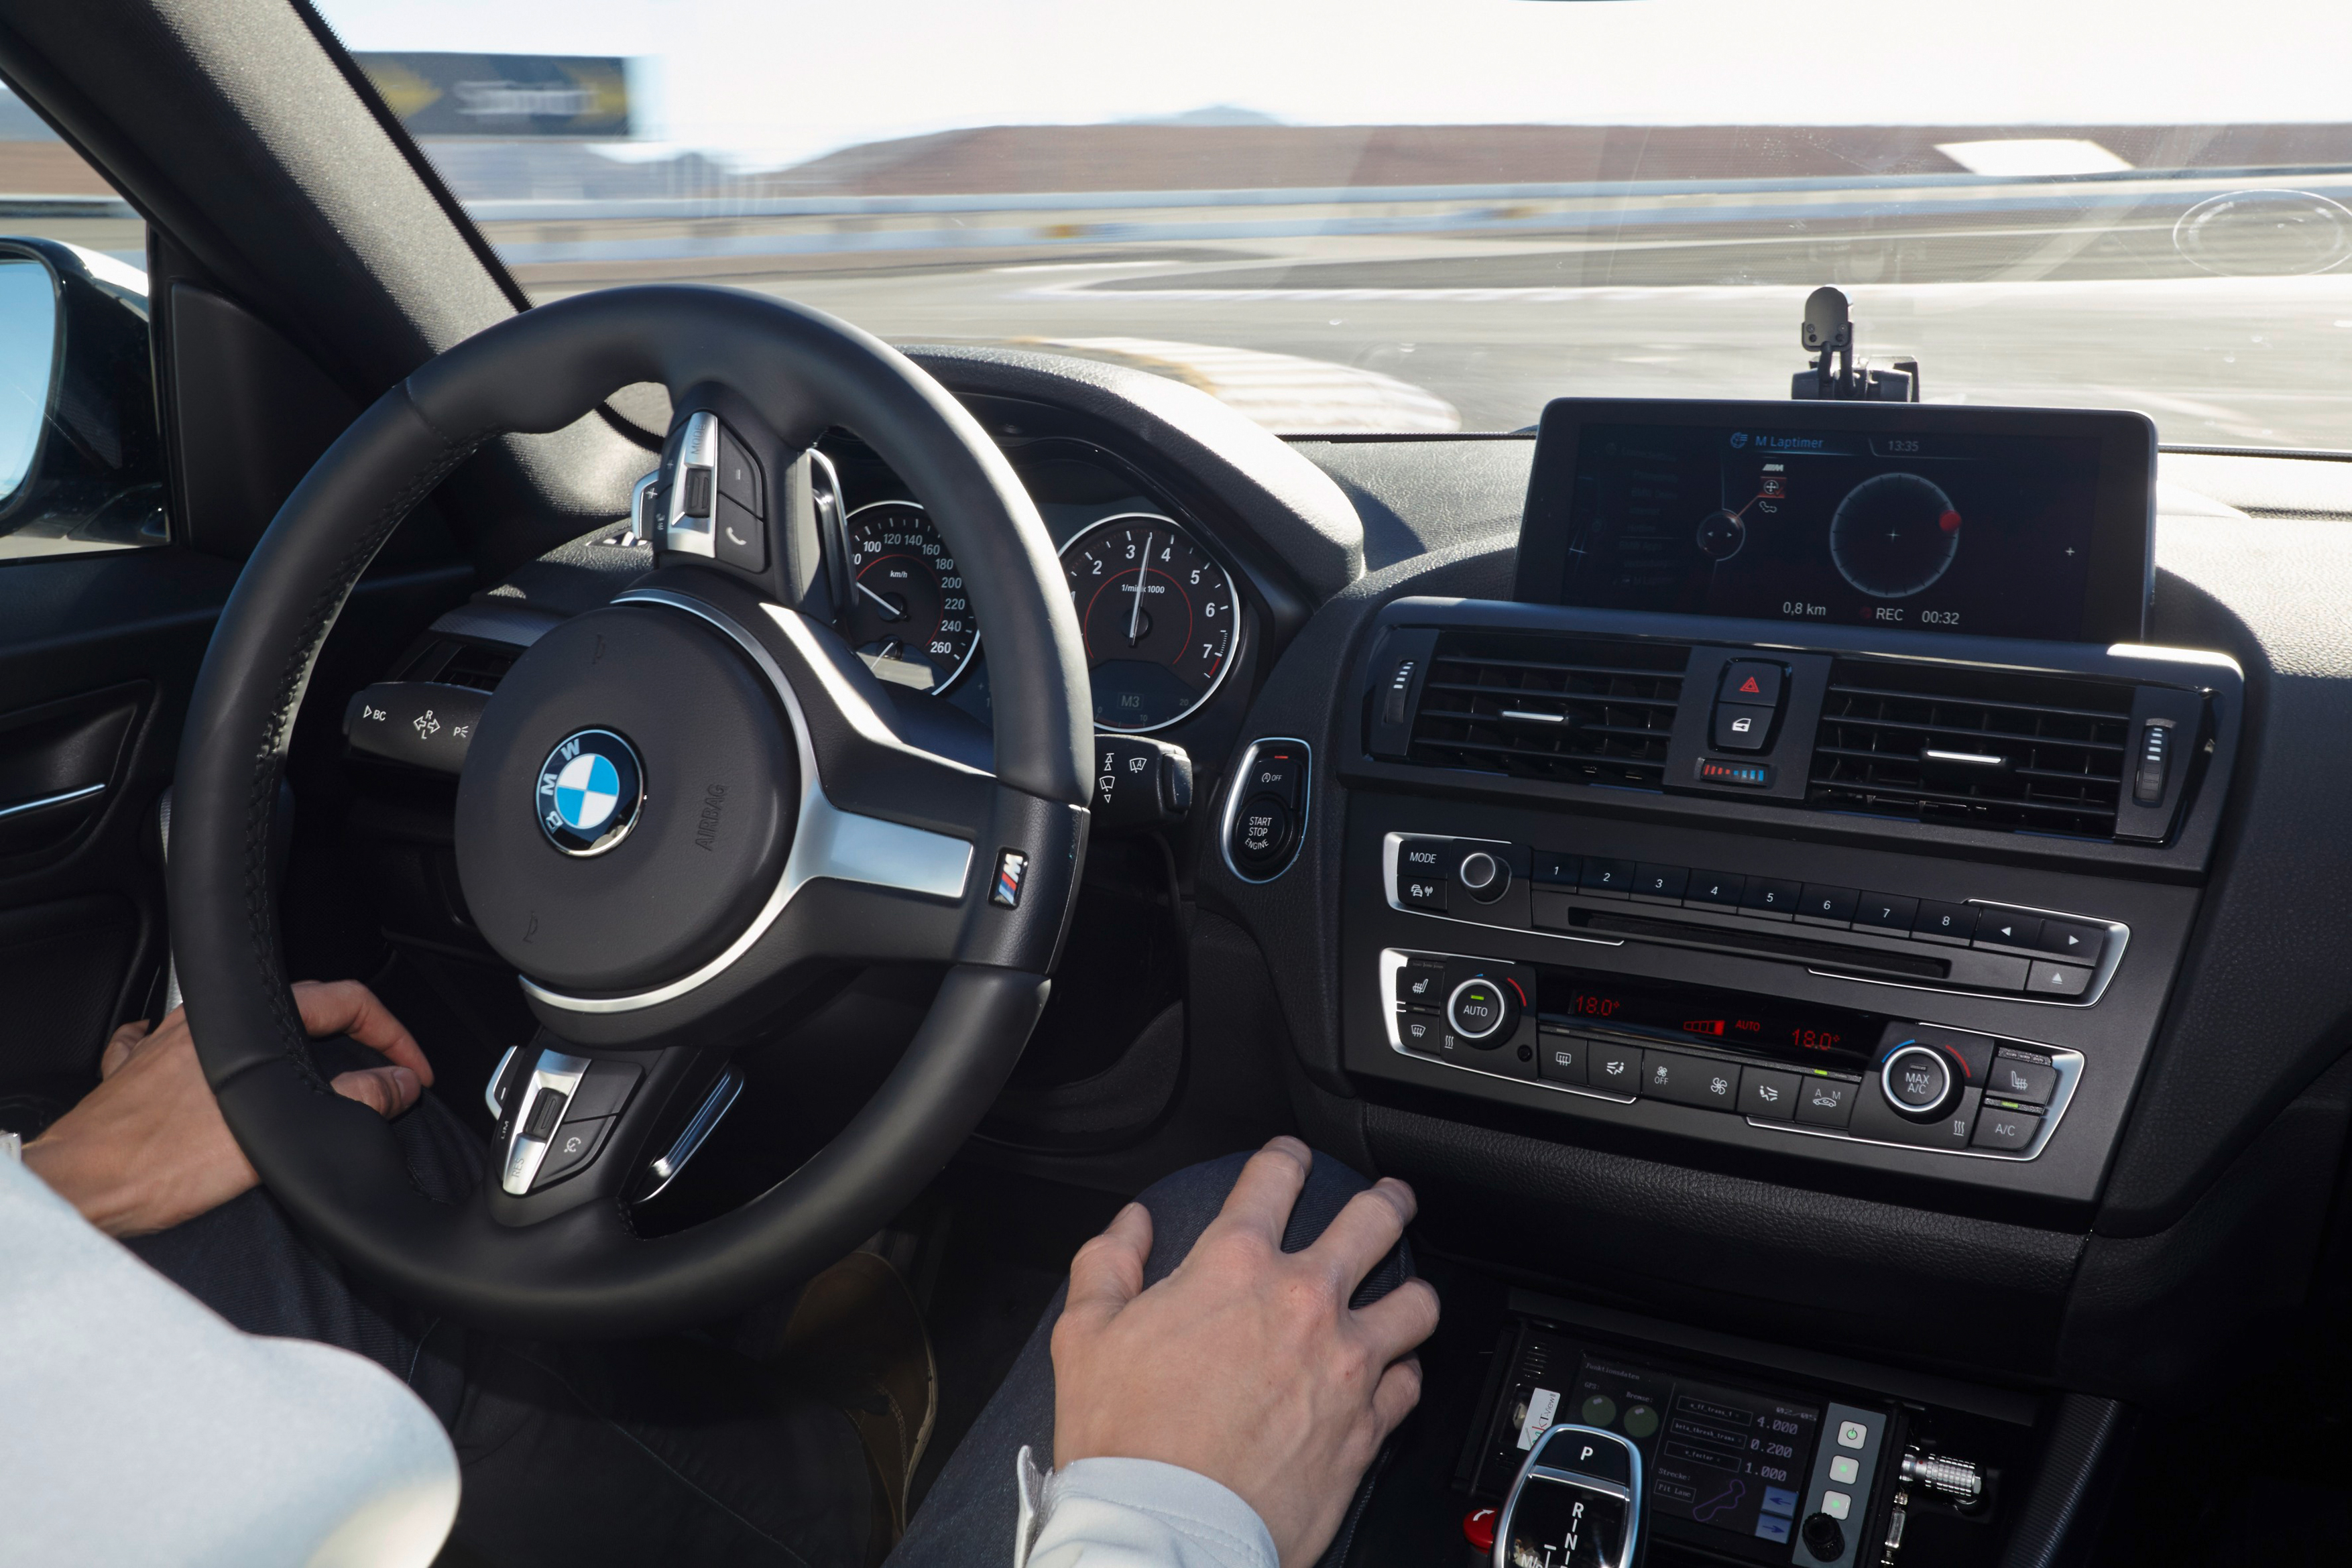 BMW joins forces with Baidu for automated driving